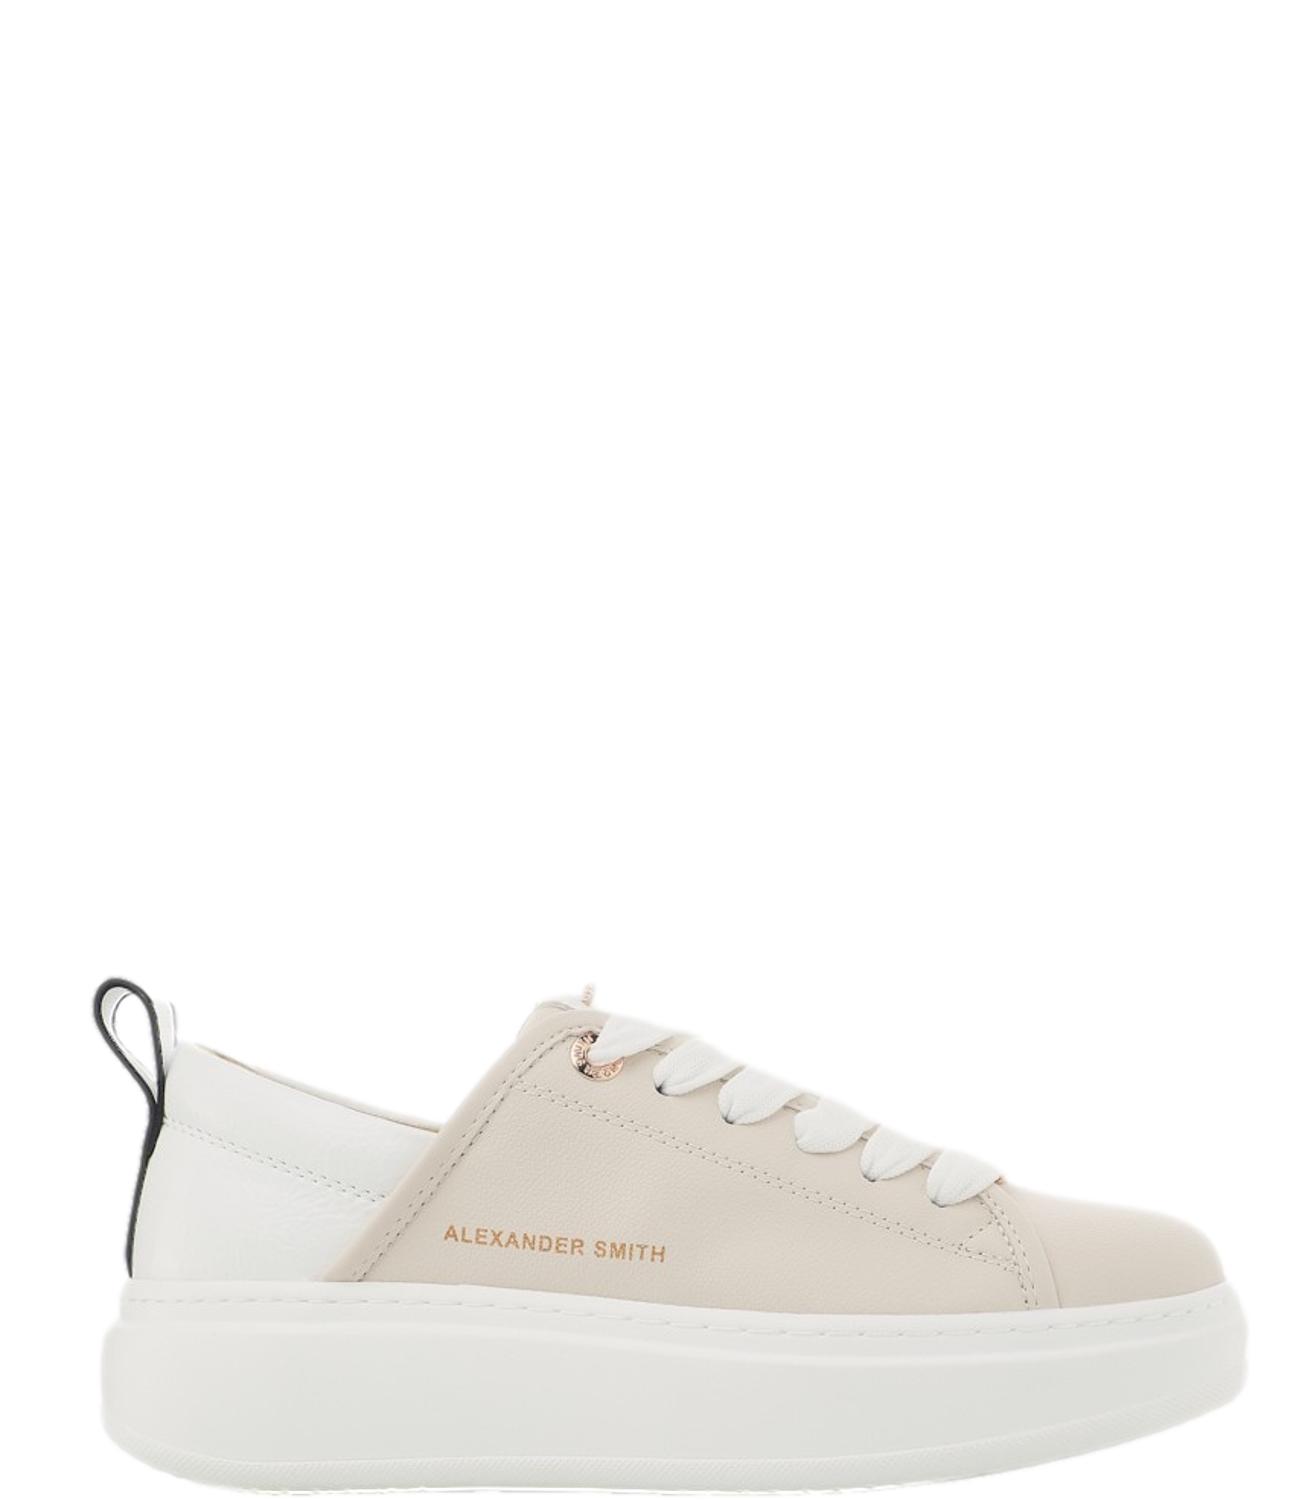 Alexander Smith sneakers Eco Wembley white nude